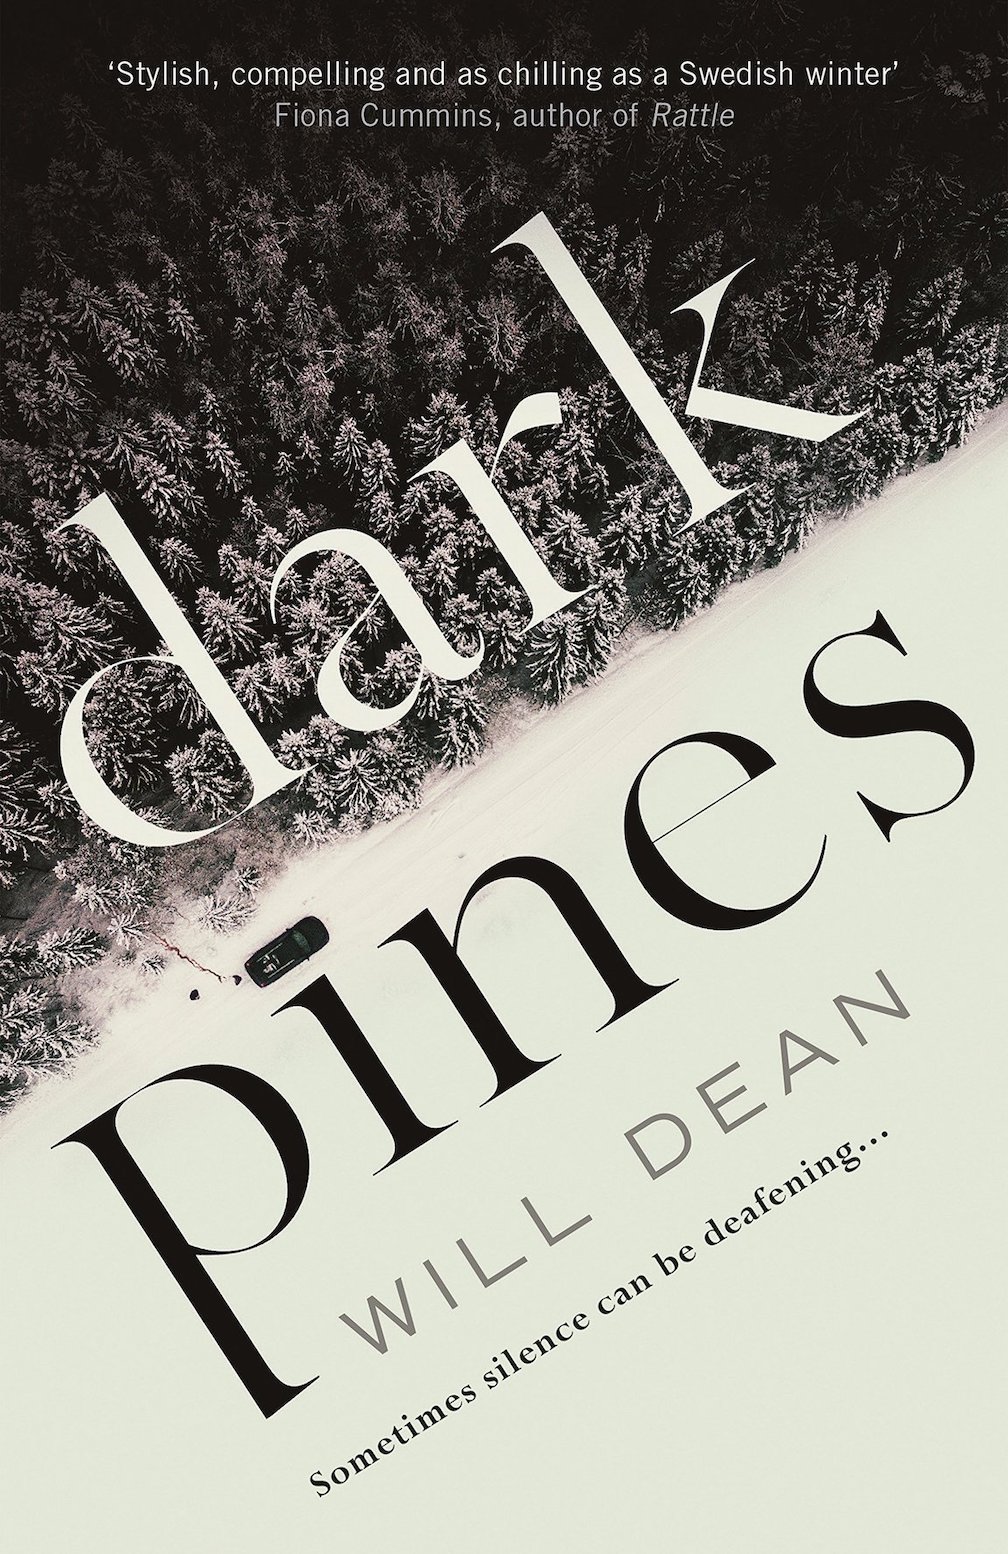 The book cover of dark pines that has a clear divide between the snow and the dense forrest.